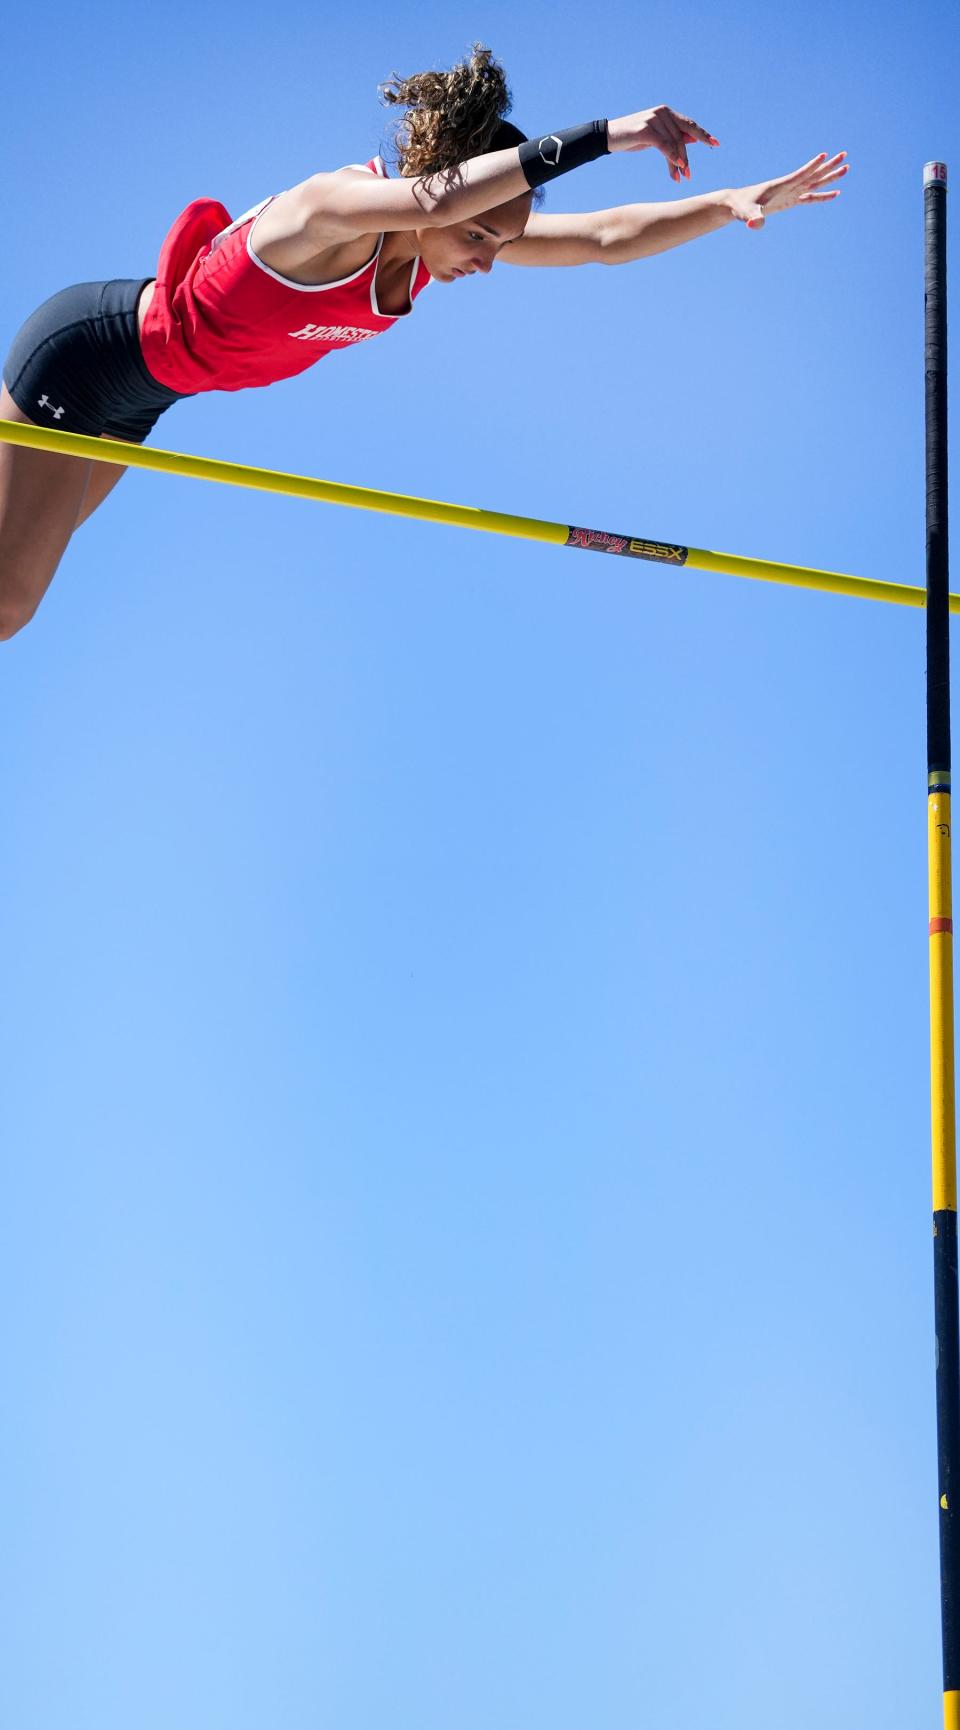 Homestead senior Peyton Berryman (482) finishes in first place pole vaulting 12 feet and 9 inches in Division 1 during the WIAA state track and field meet Friday, June 3, 2022, at Veterans Memorial Stadium Complex in La Crosse.